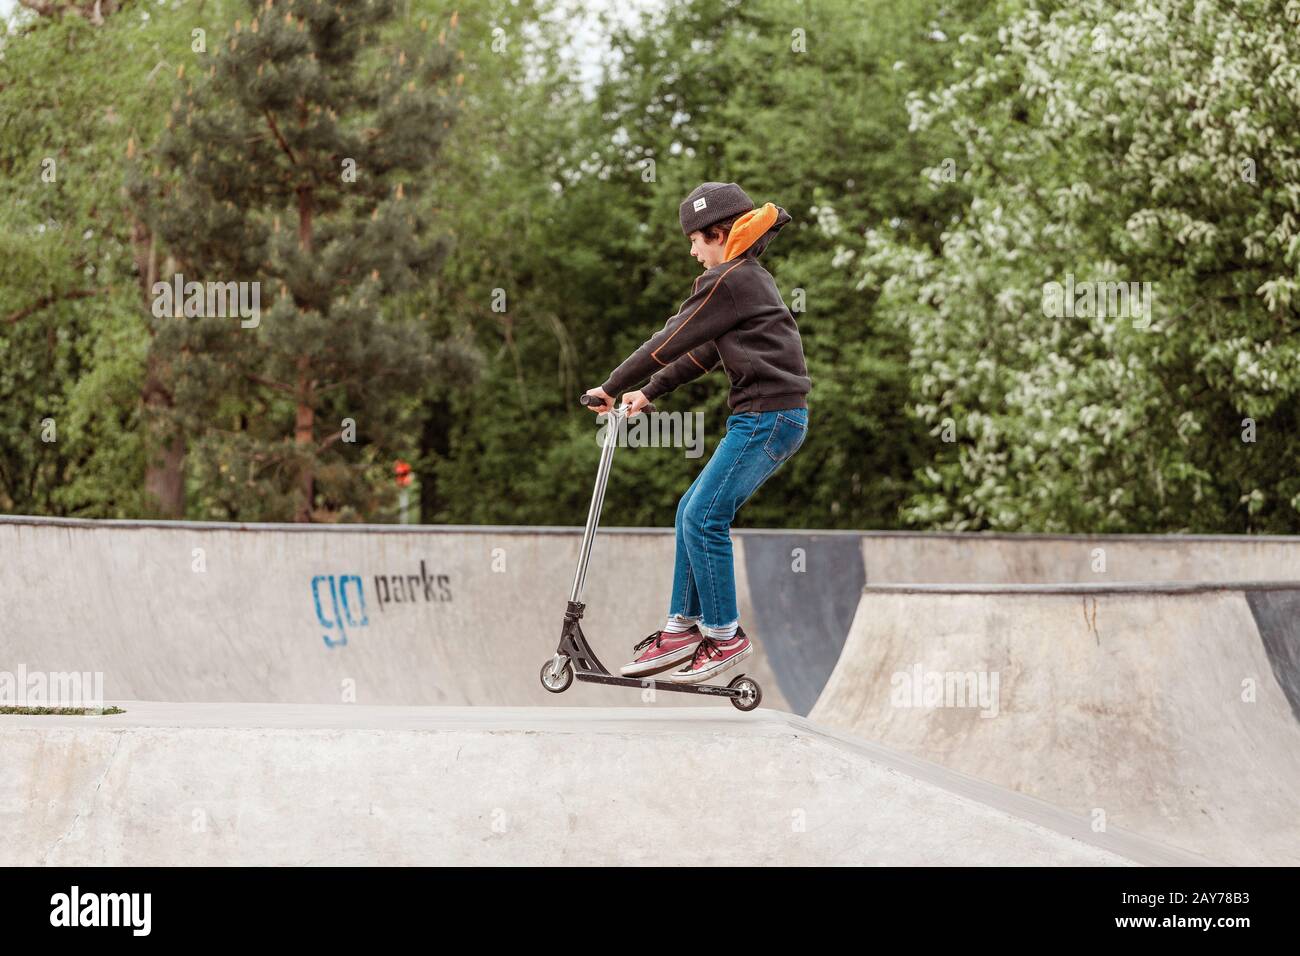 Scooter Jump Ramps High Resolution Stock Photography and Images - Alamy